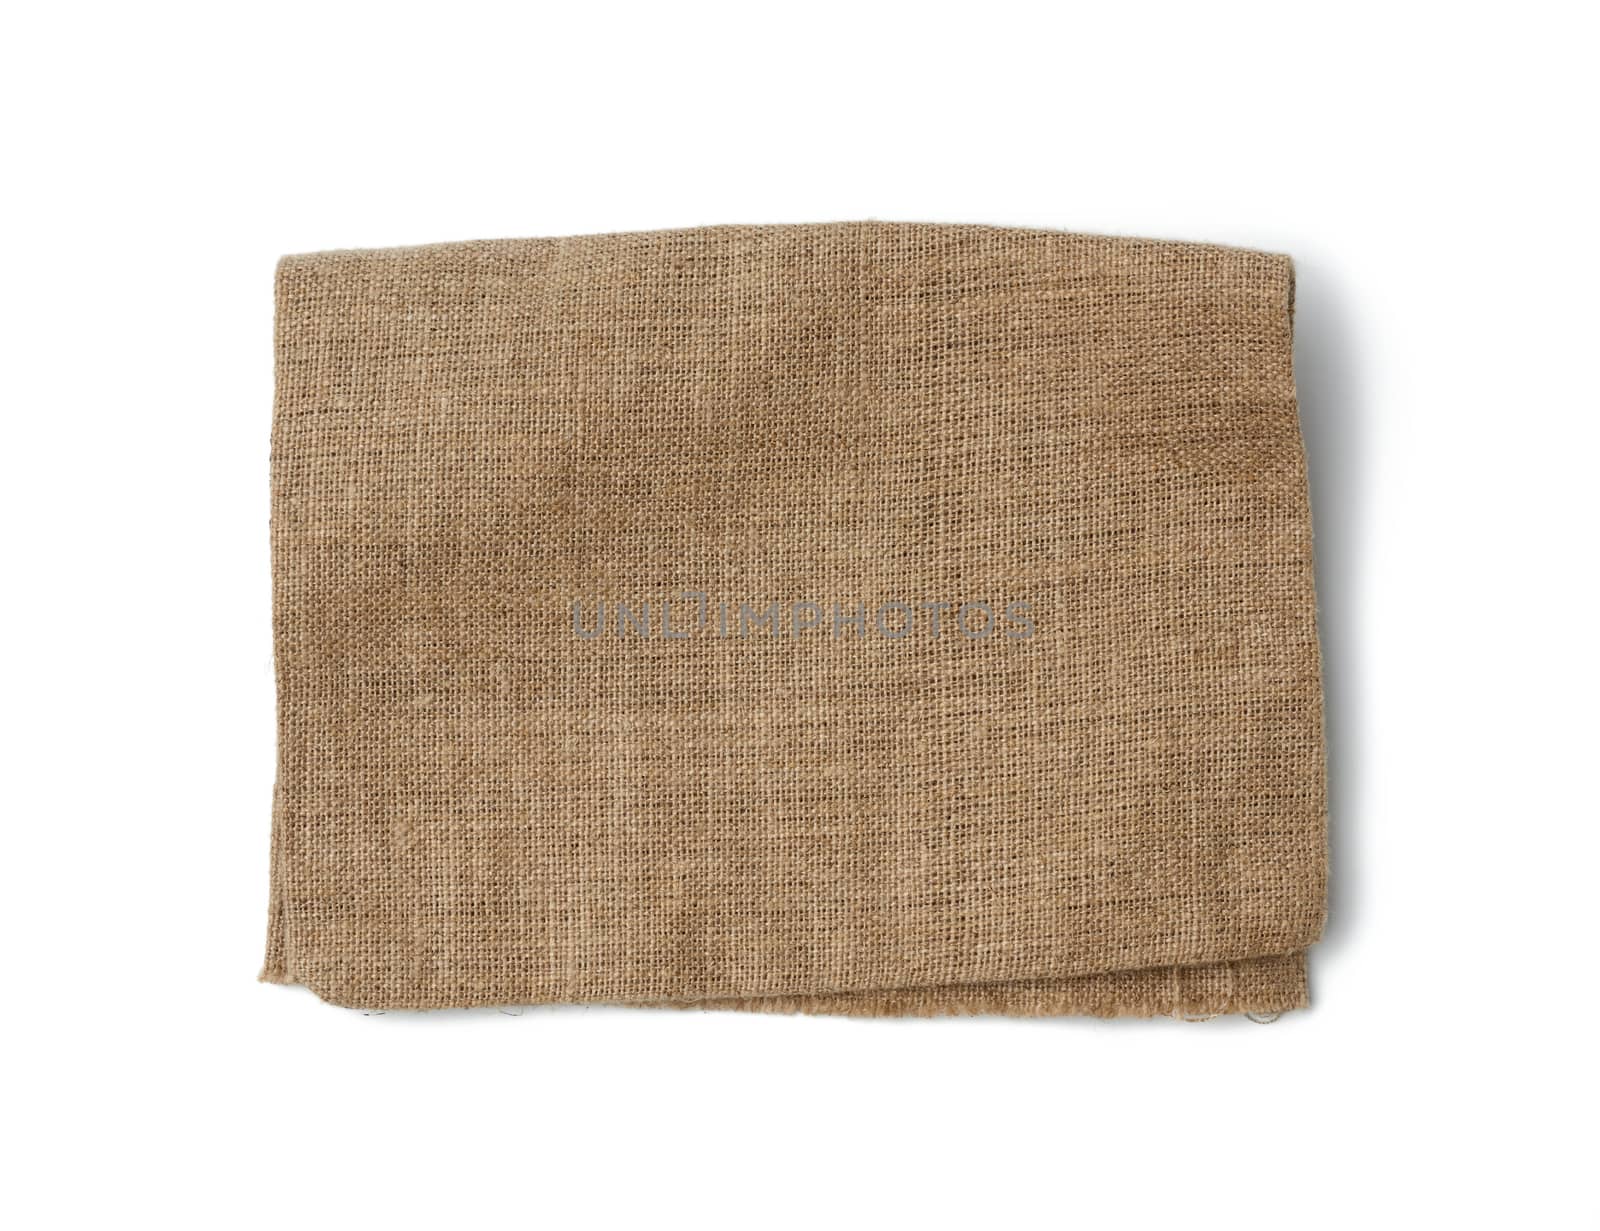 brown burlap fragment isolated on white background, top view